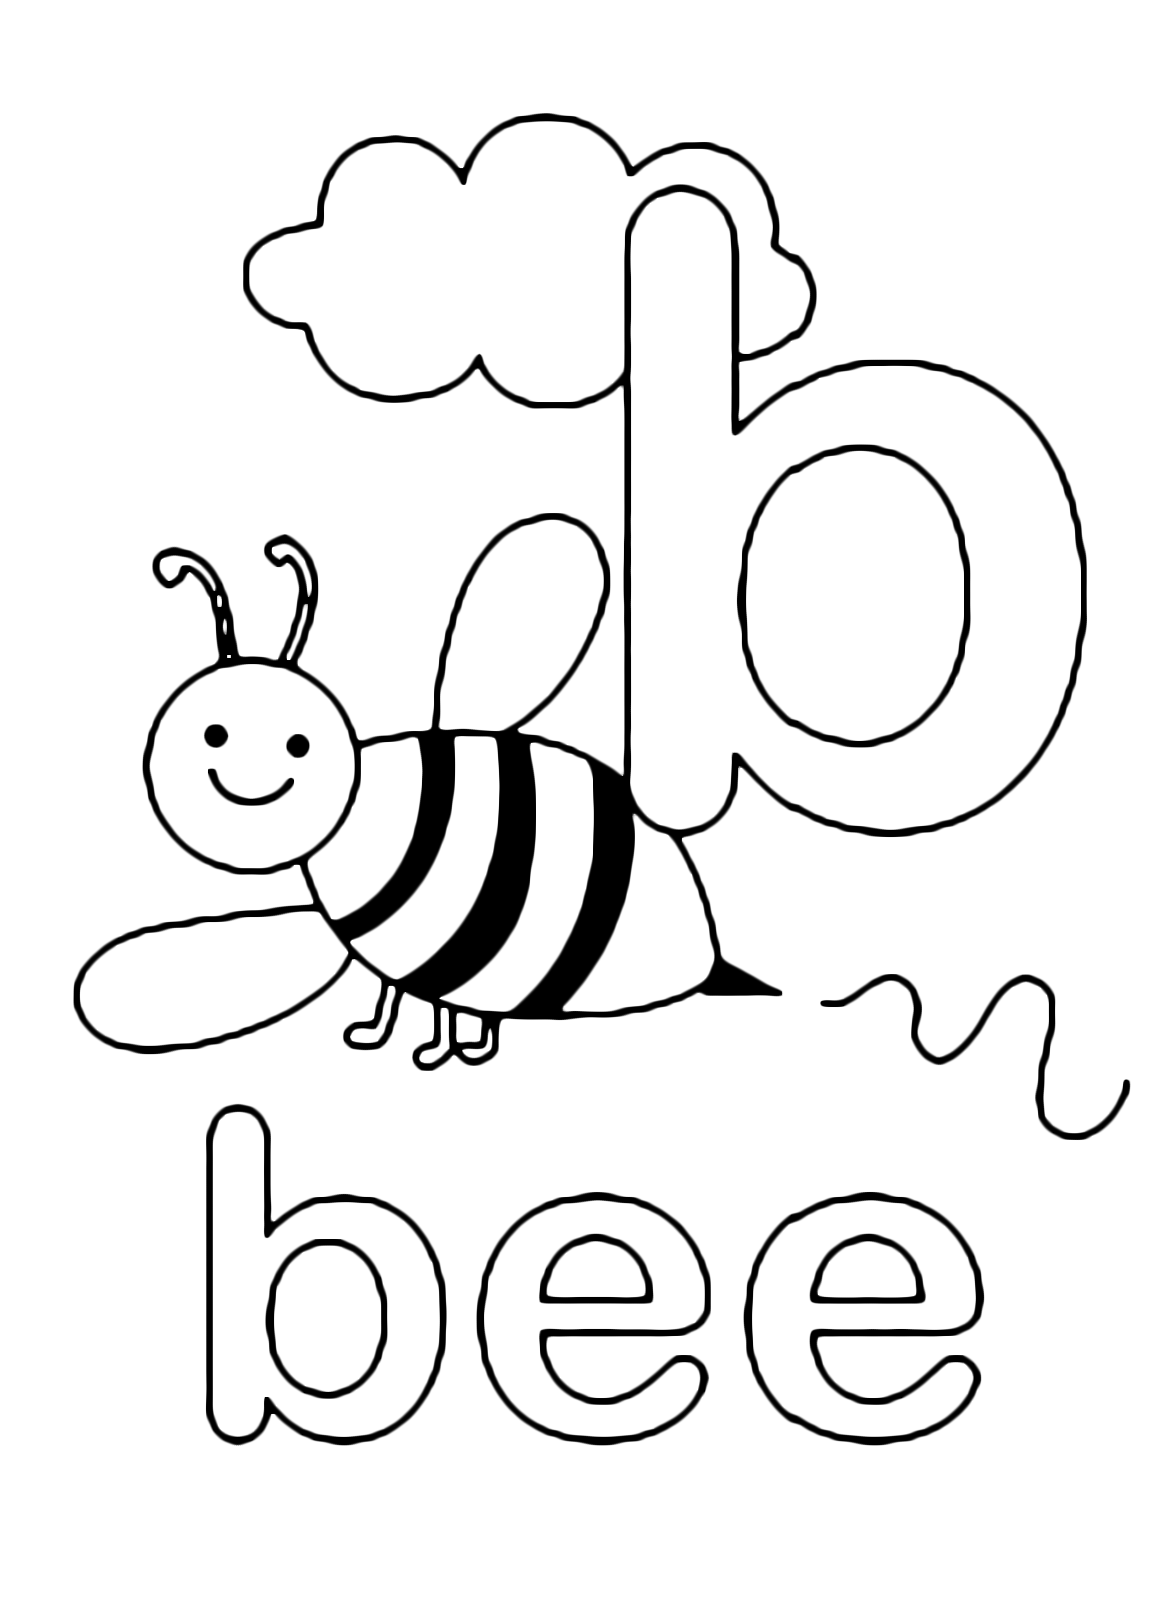 Letters and numbers - b for bee lowercase letter